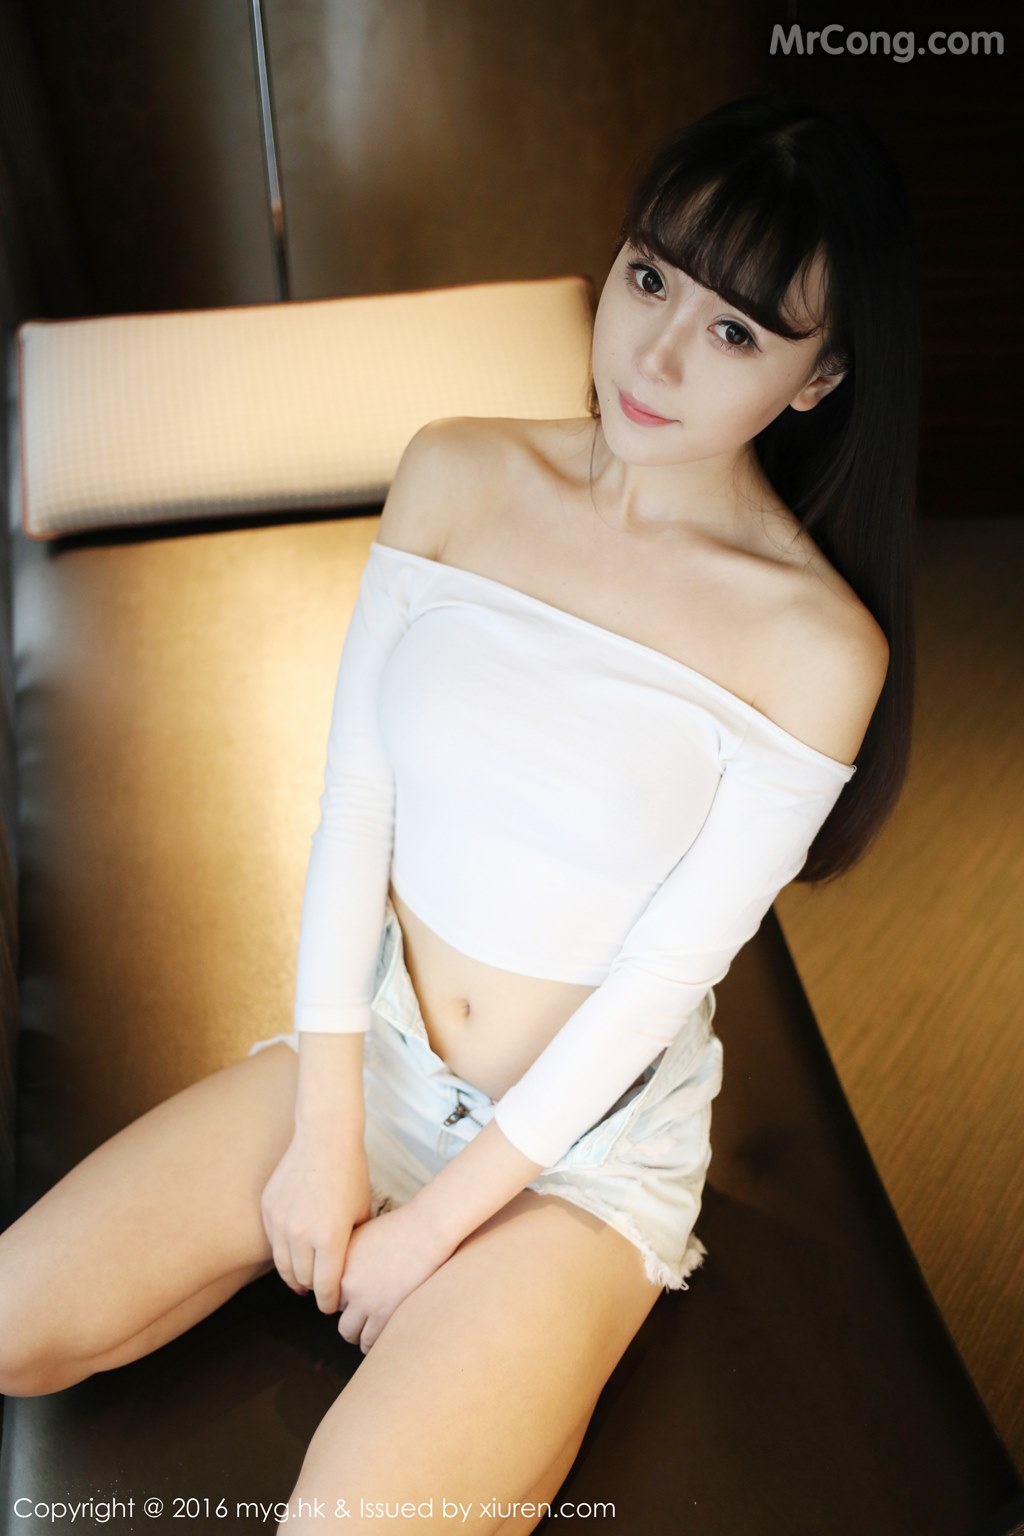 MyGirl Vol.197: Model Kitty Zhao Xiaomi (赵 小米) (66 pictures)